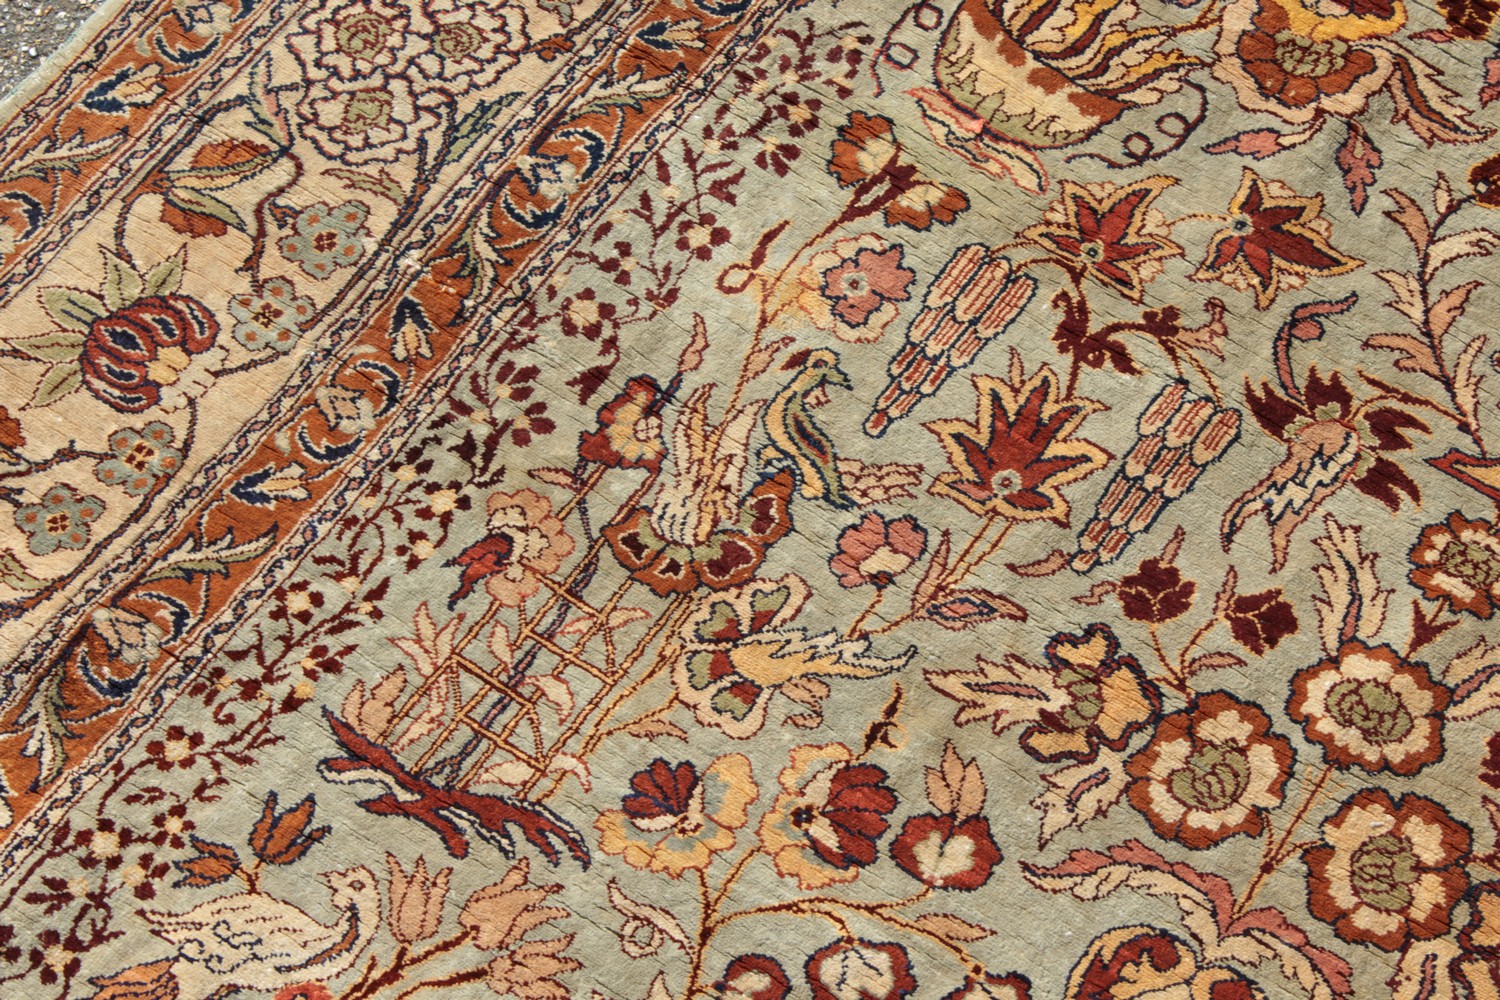 A FINE TURKISH SILK RUG with allover pattern of birds and flowers. 6ft 10ins x 4ft 3ins. - Image 4 of 17